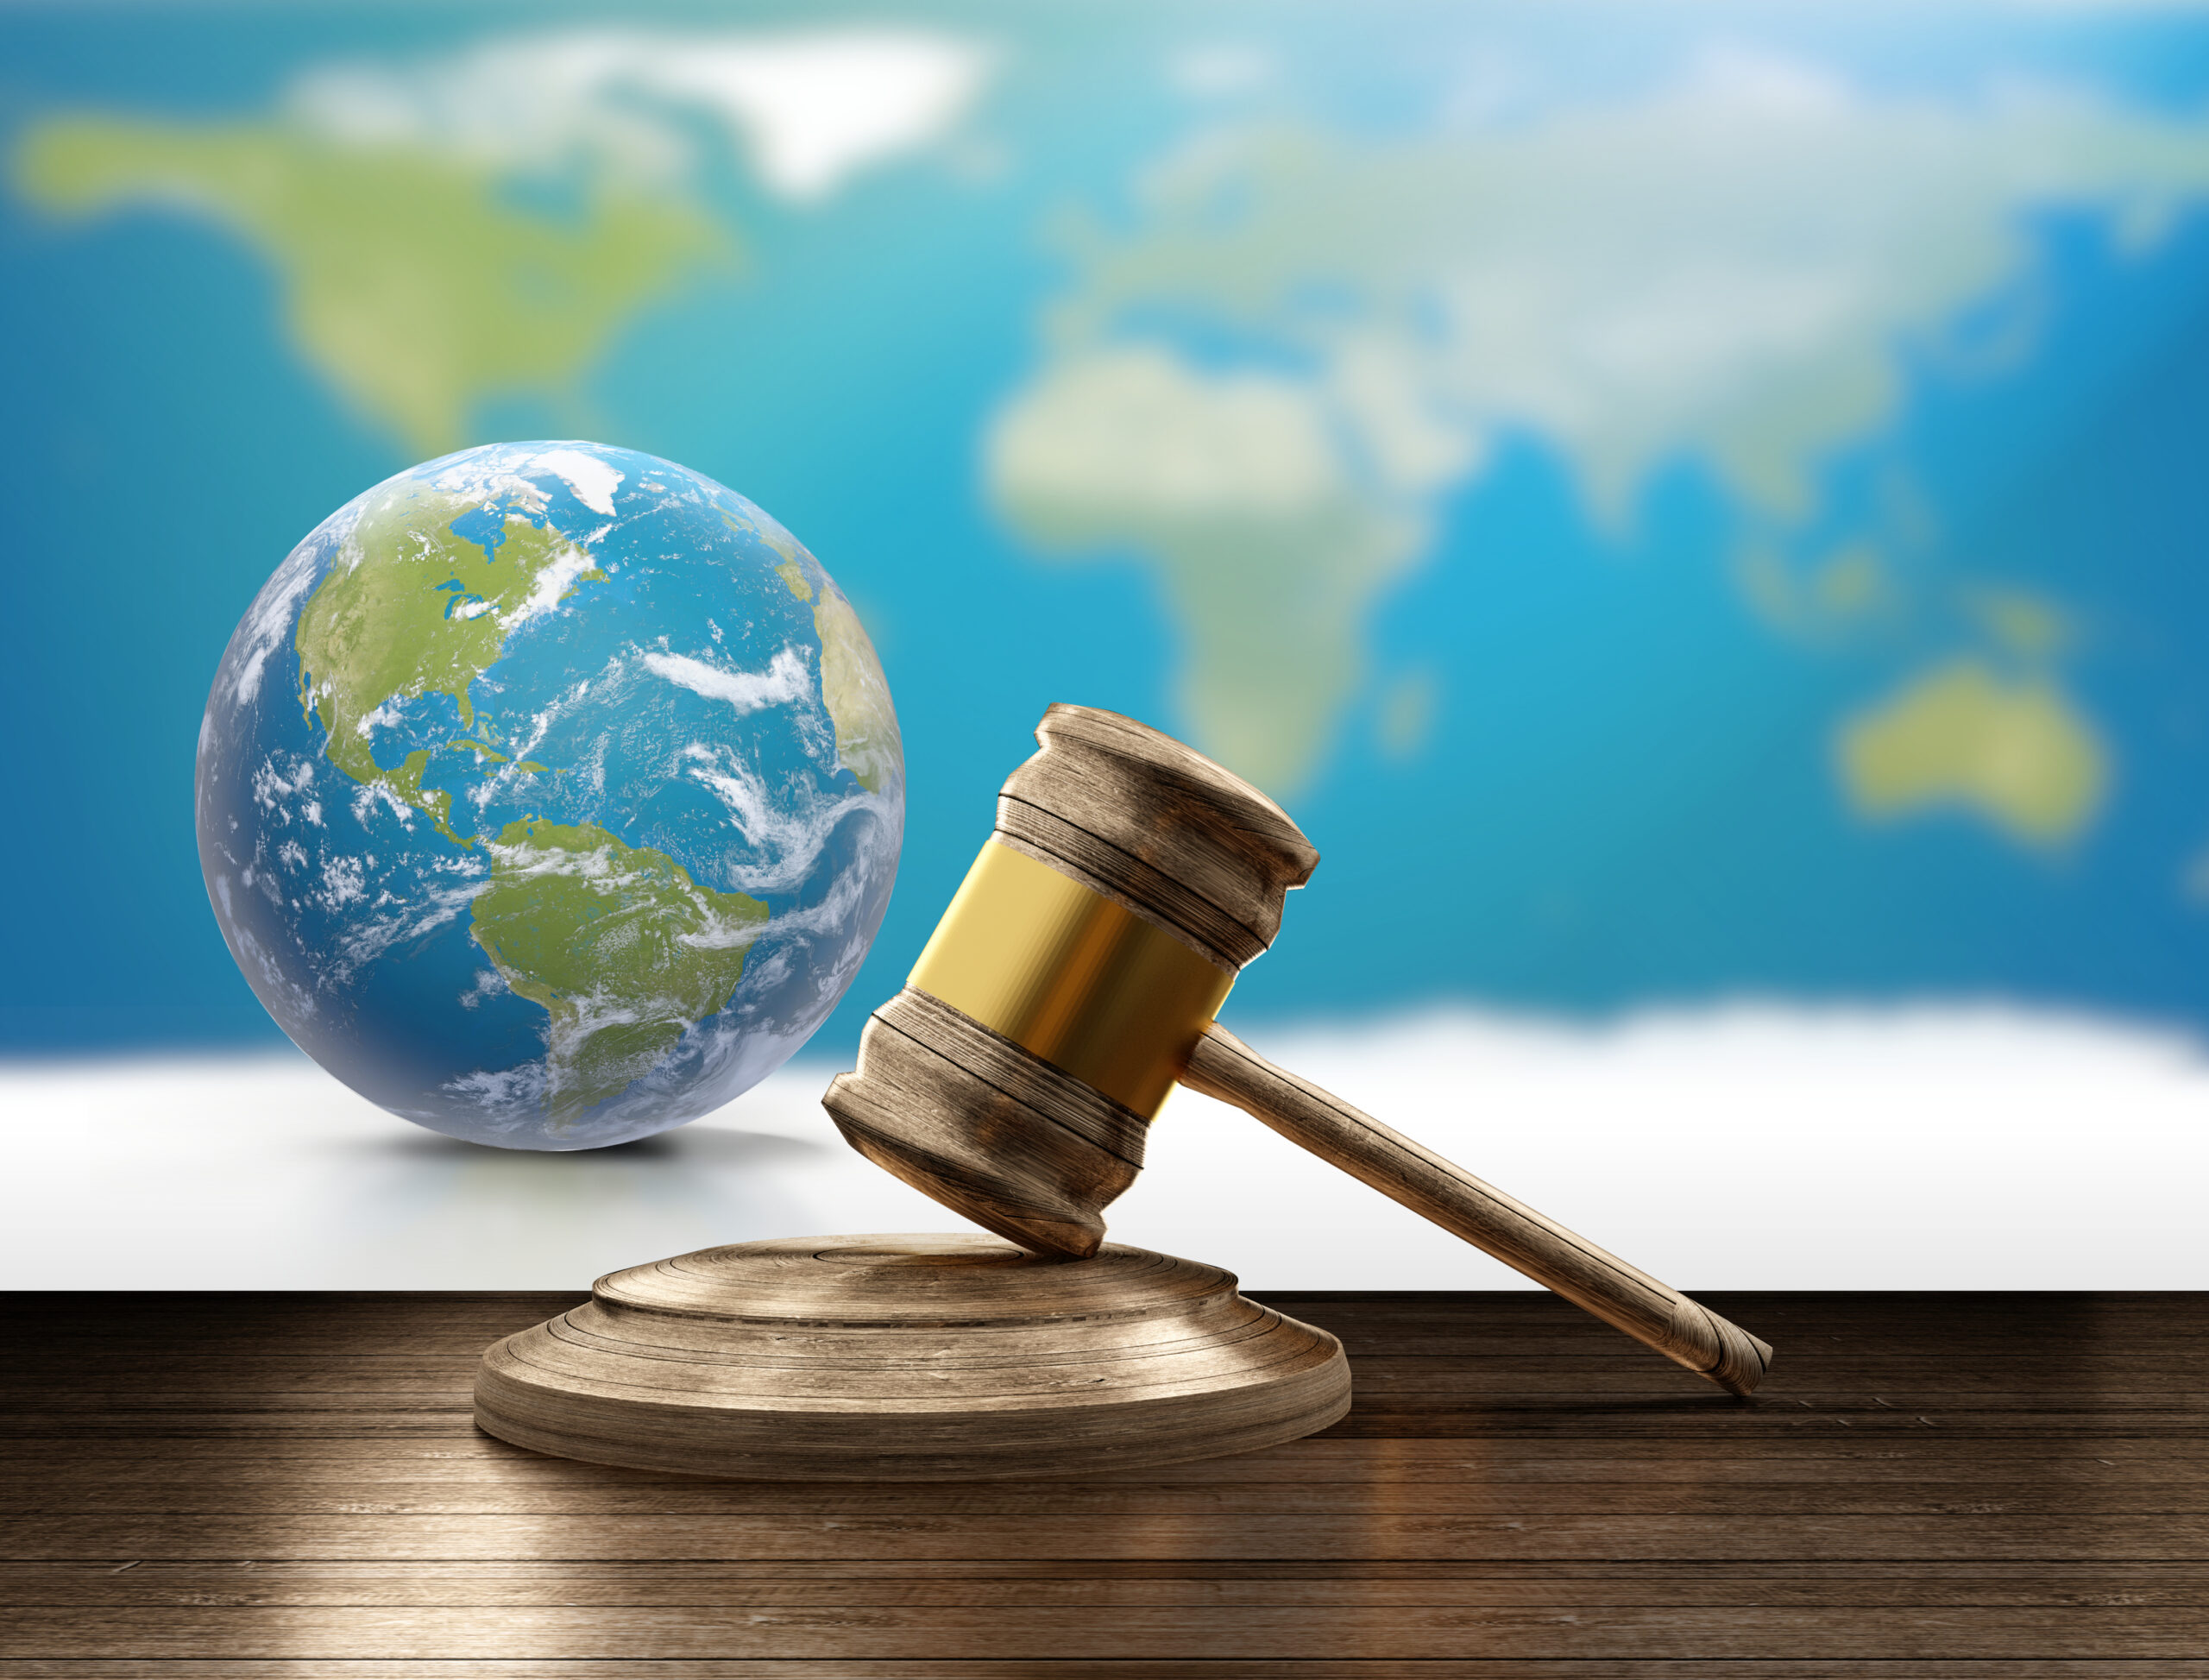 world map planet earth globe and wooden judge gavel 3d-illustration